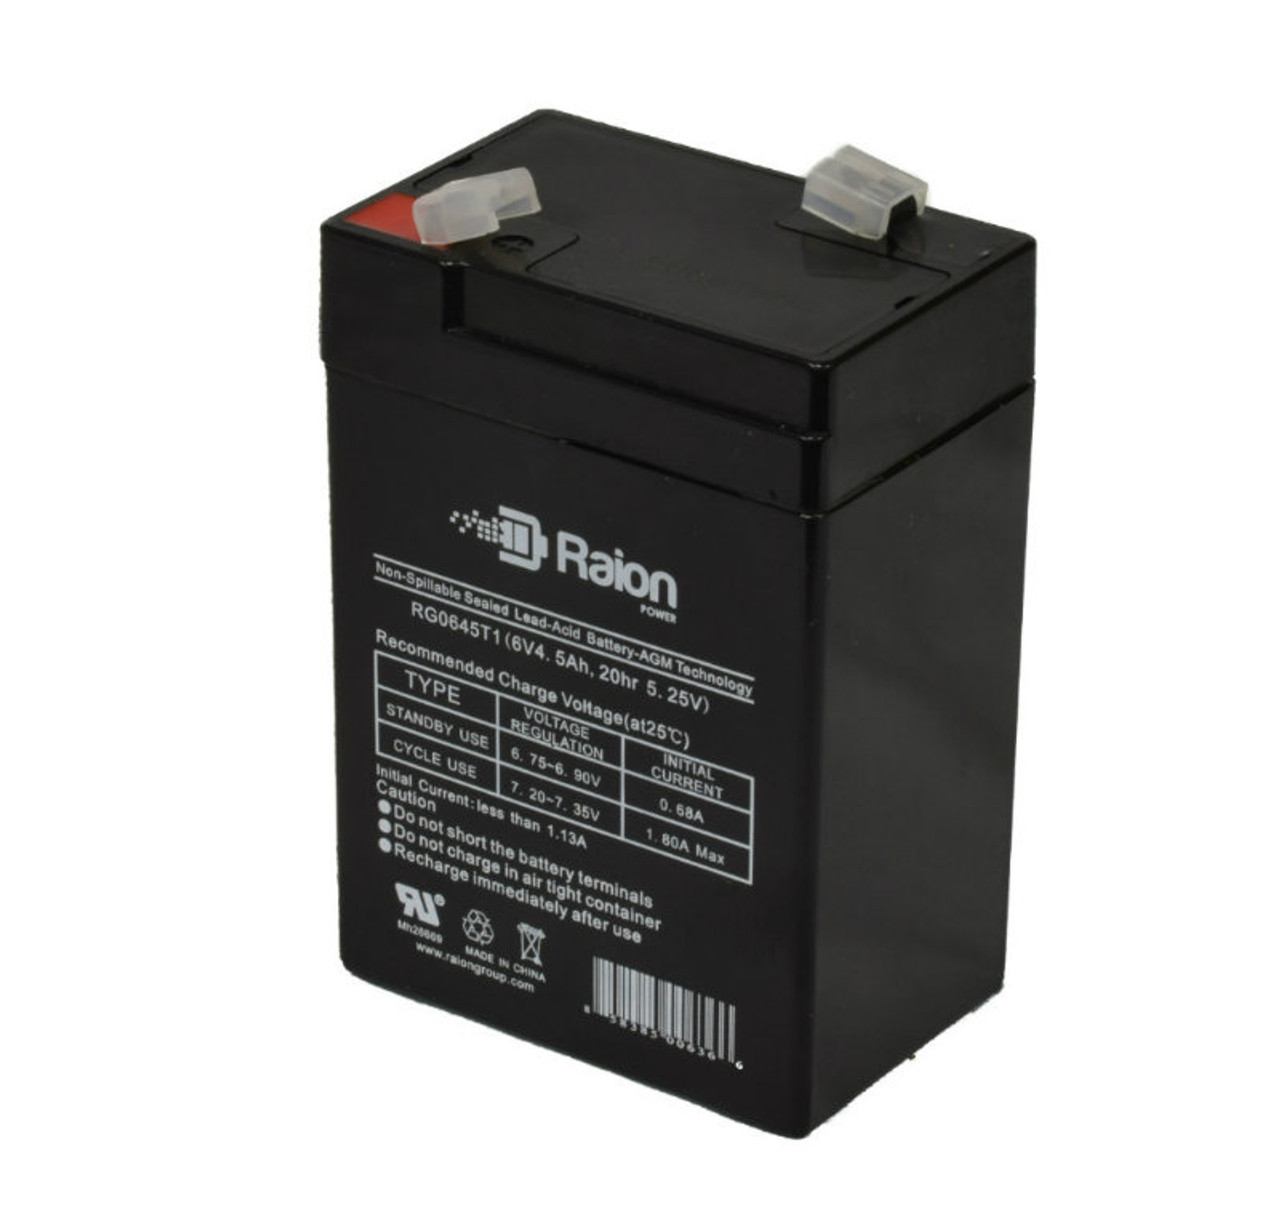 Raion Power RG0645T1 6V 4.5Ah Replacement Battery Cartridge for Chiway SJ6V4Ah